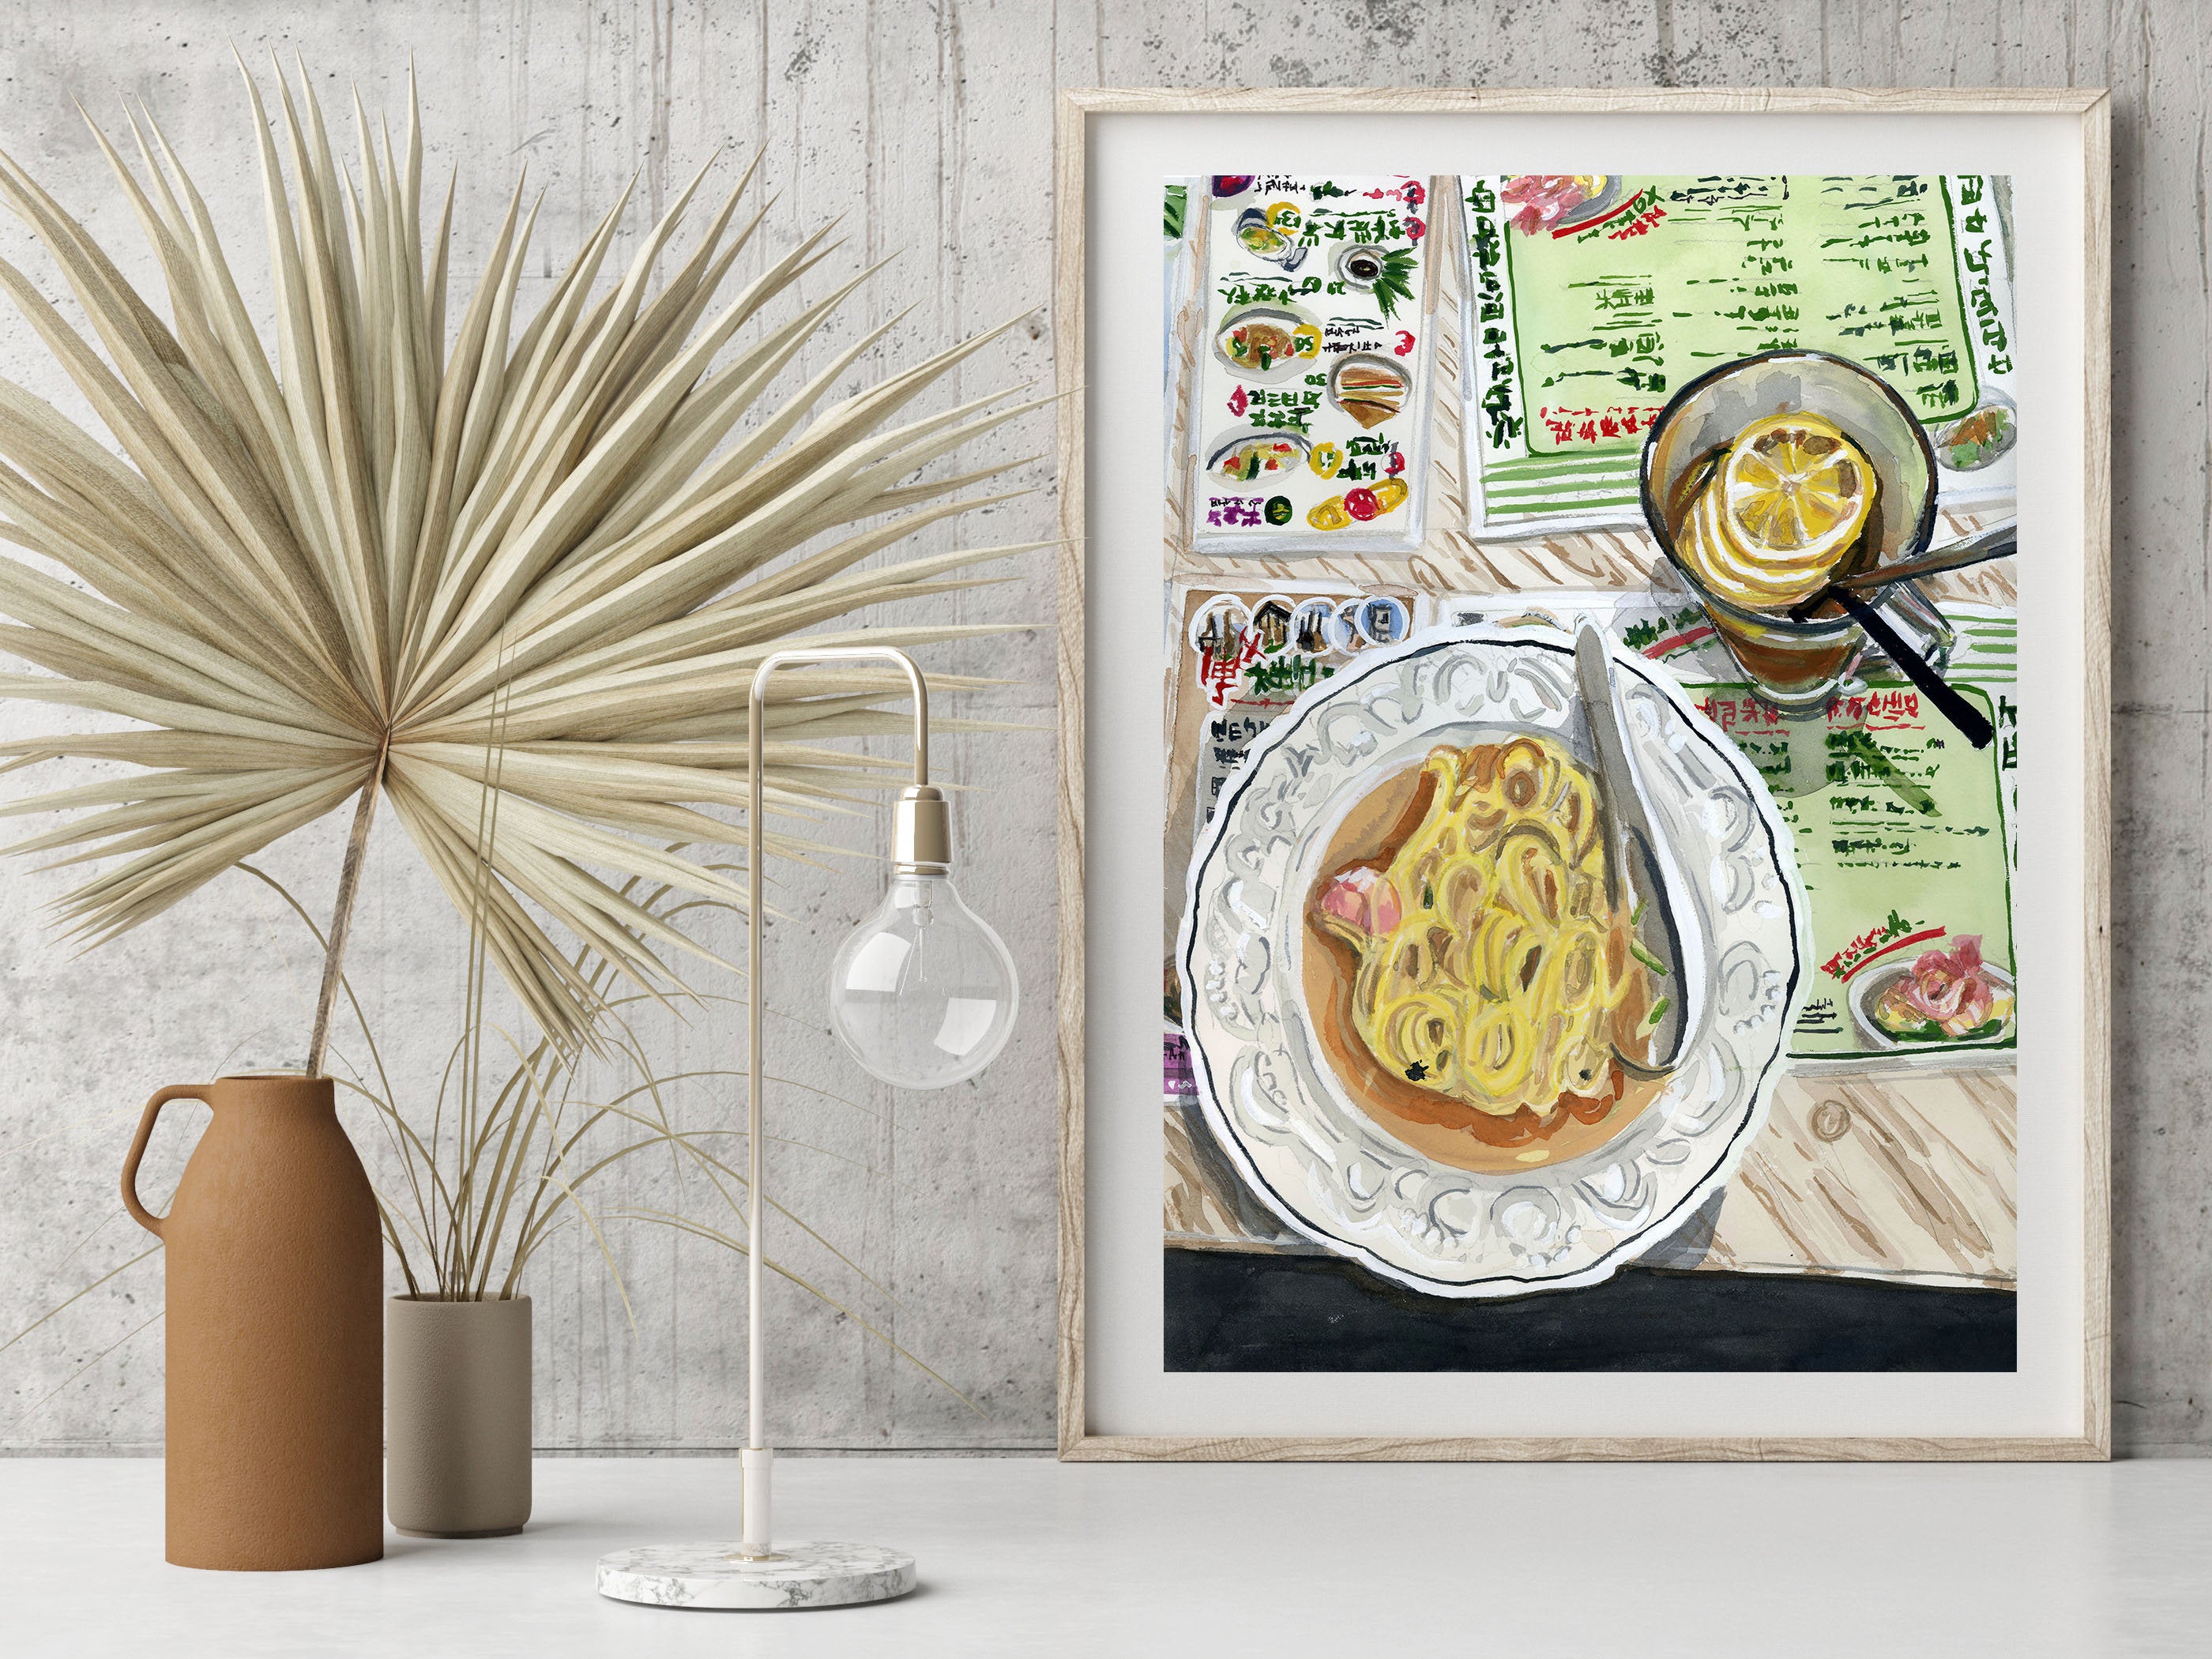 Asian noodles and Hong Kong tea print of painting by Medjool Studio. Print of original gouache painting of a noodle meal at a Hong Kong restaurant in Kowloon.